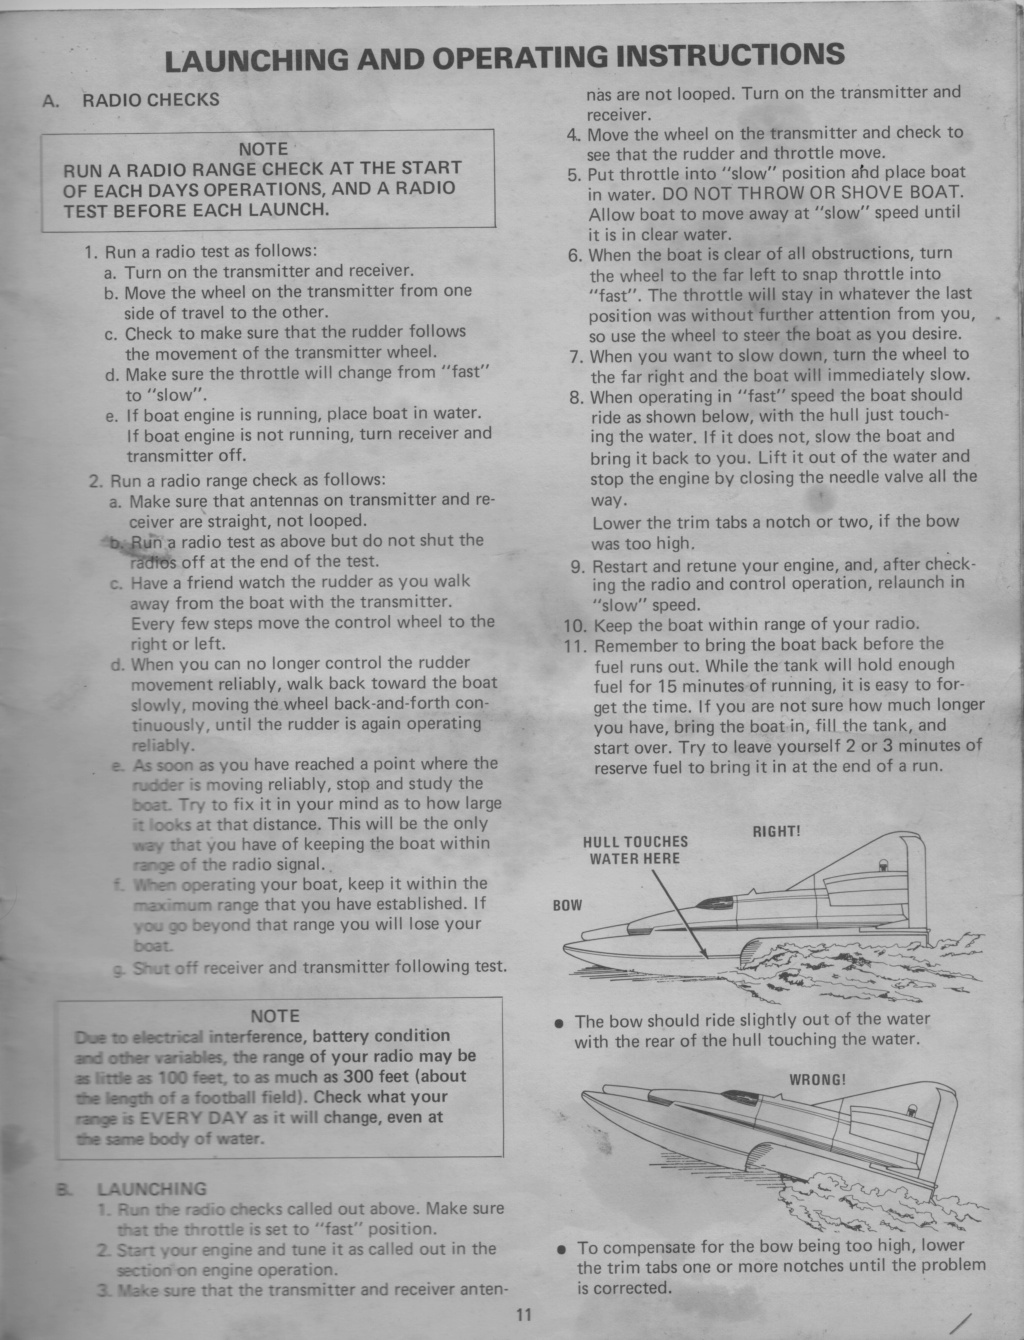 Hydro Blaster pictures and manual scans . Hydro_21